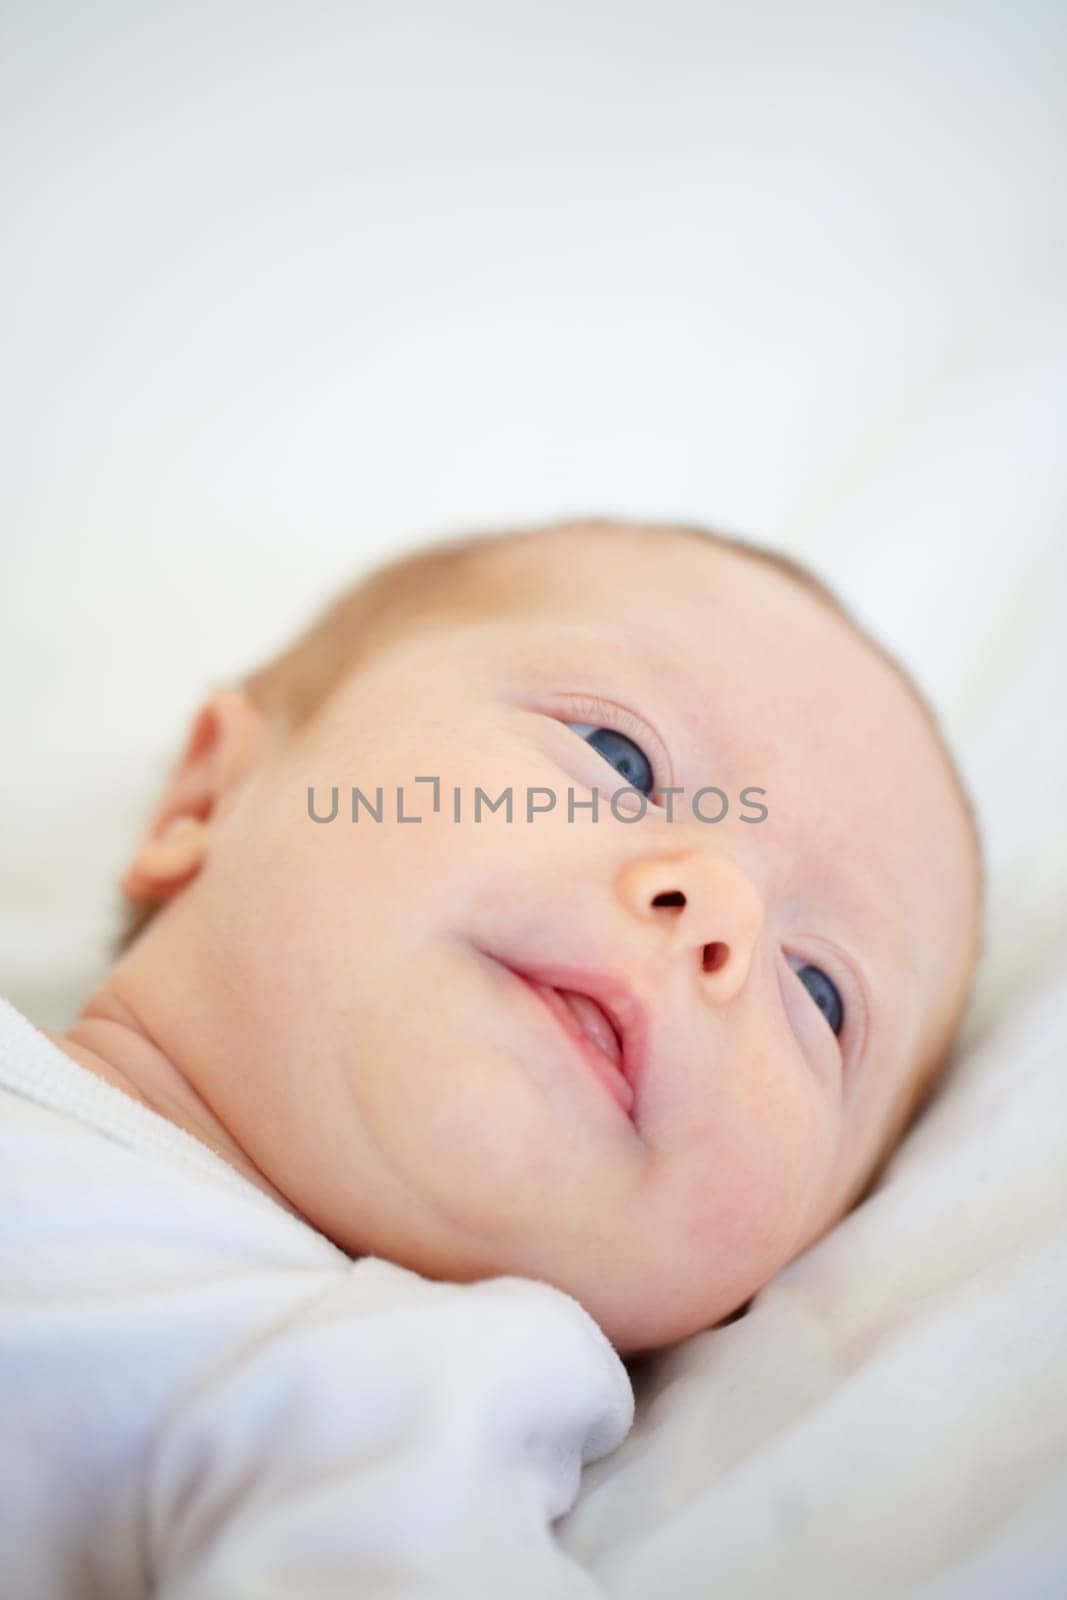 Closeup, baby and face for wake up on bed from good dream, sleep or nap in nursery. Infant, looking and relaxing on pillow for child growth, cognitive and development in hope for milestone of future.